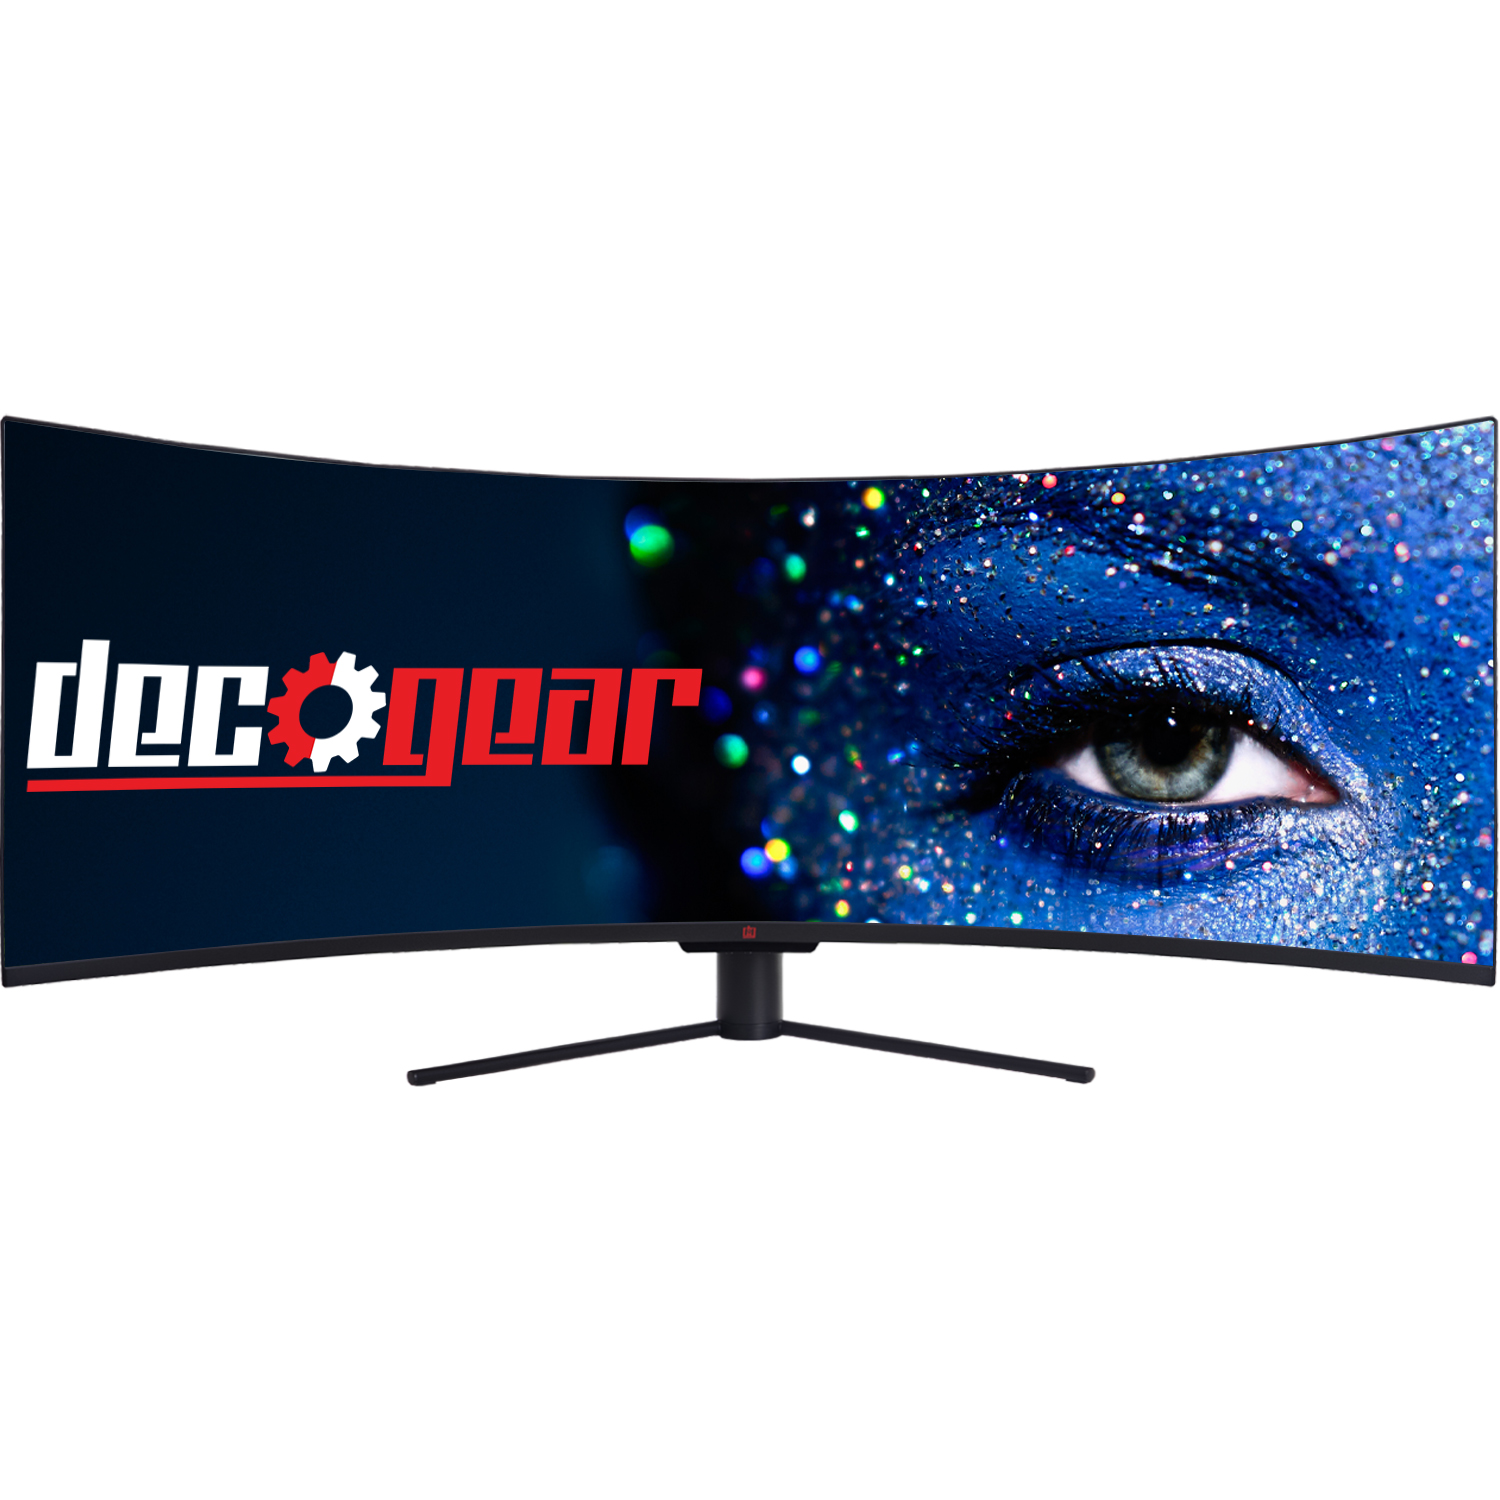 Deco Gear 49" Curved Ultrawide 5K Gaming Monitor, 32:9, 120 Hz, 101% NTSC 100% sRGB, Adjustable, Home Office and Entertainment Workstation - image 1 of 10